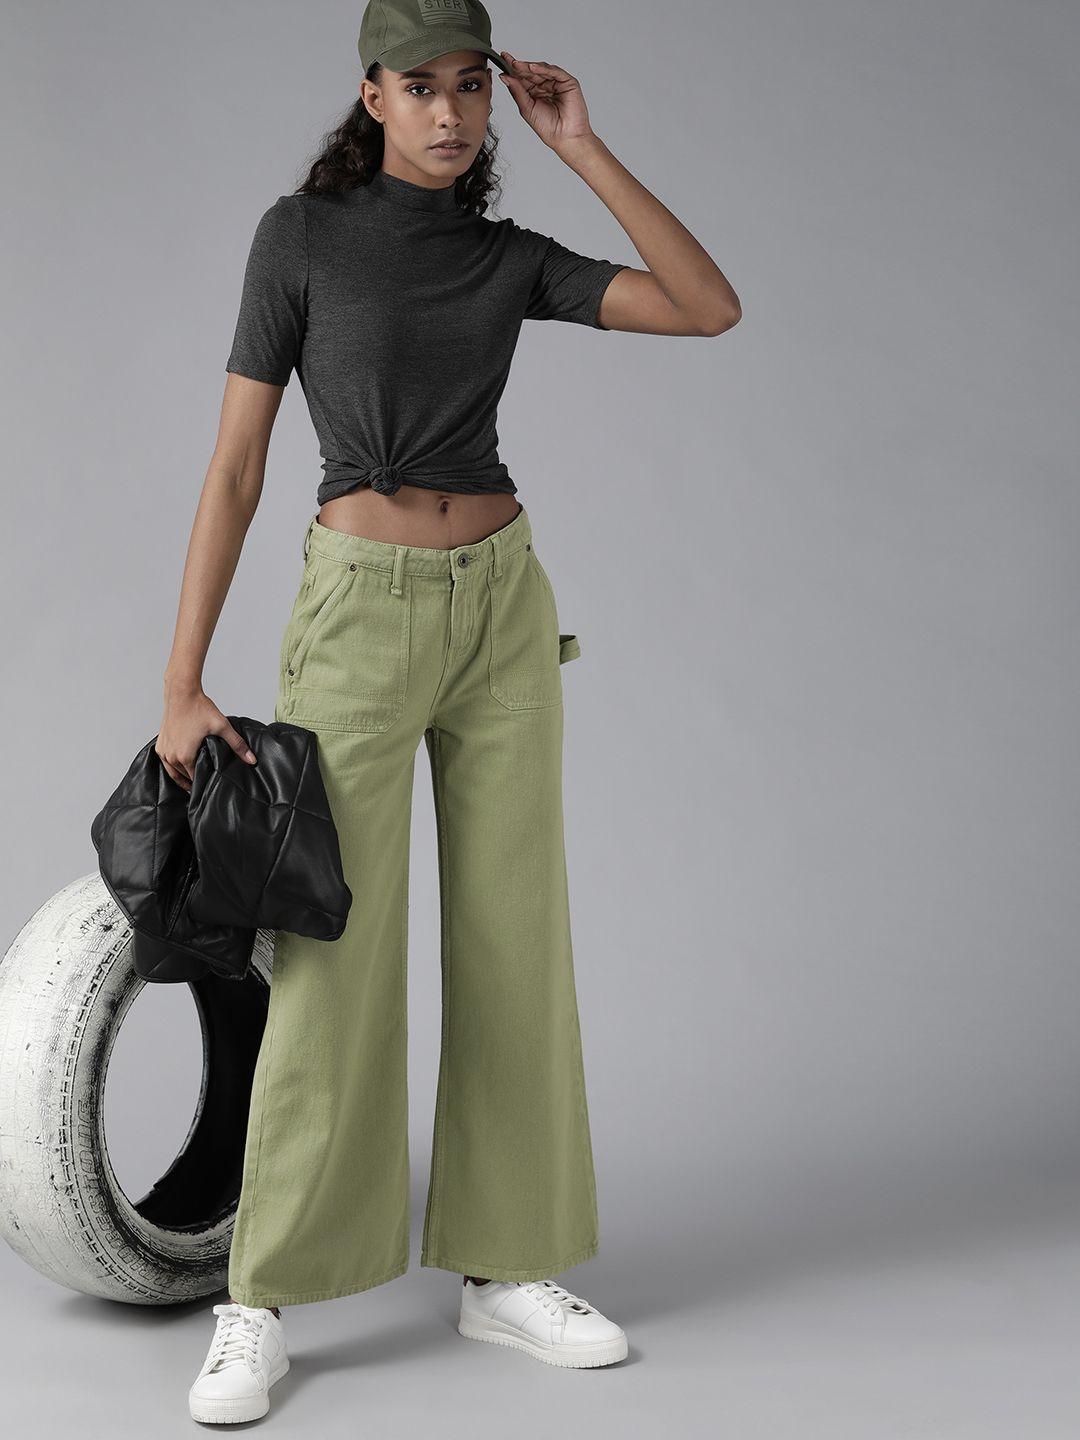 the roadster lifestyle co women olive green pure cotton wide leg jeans